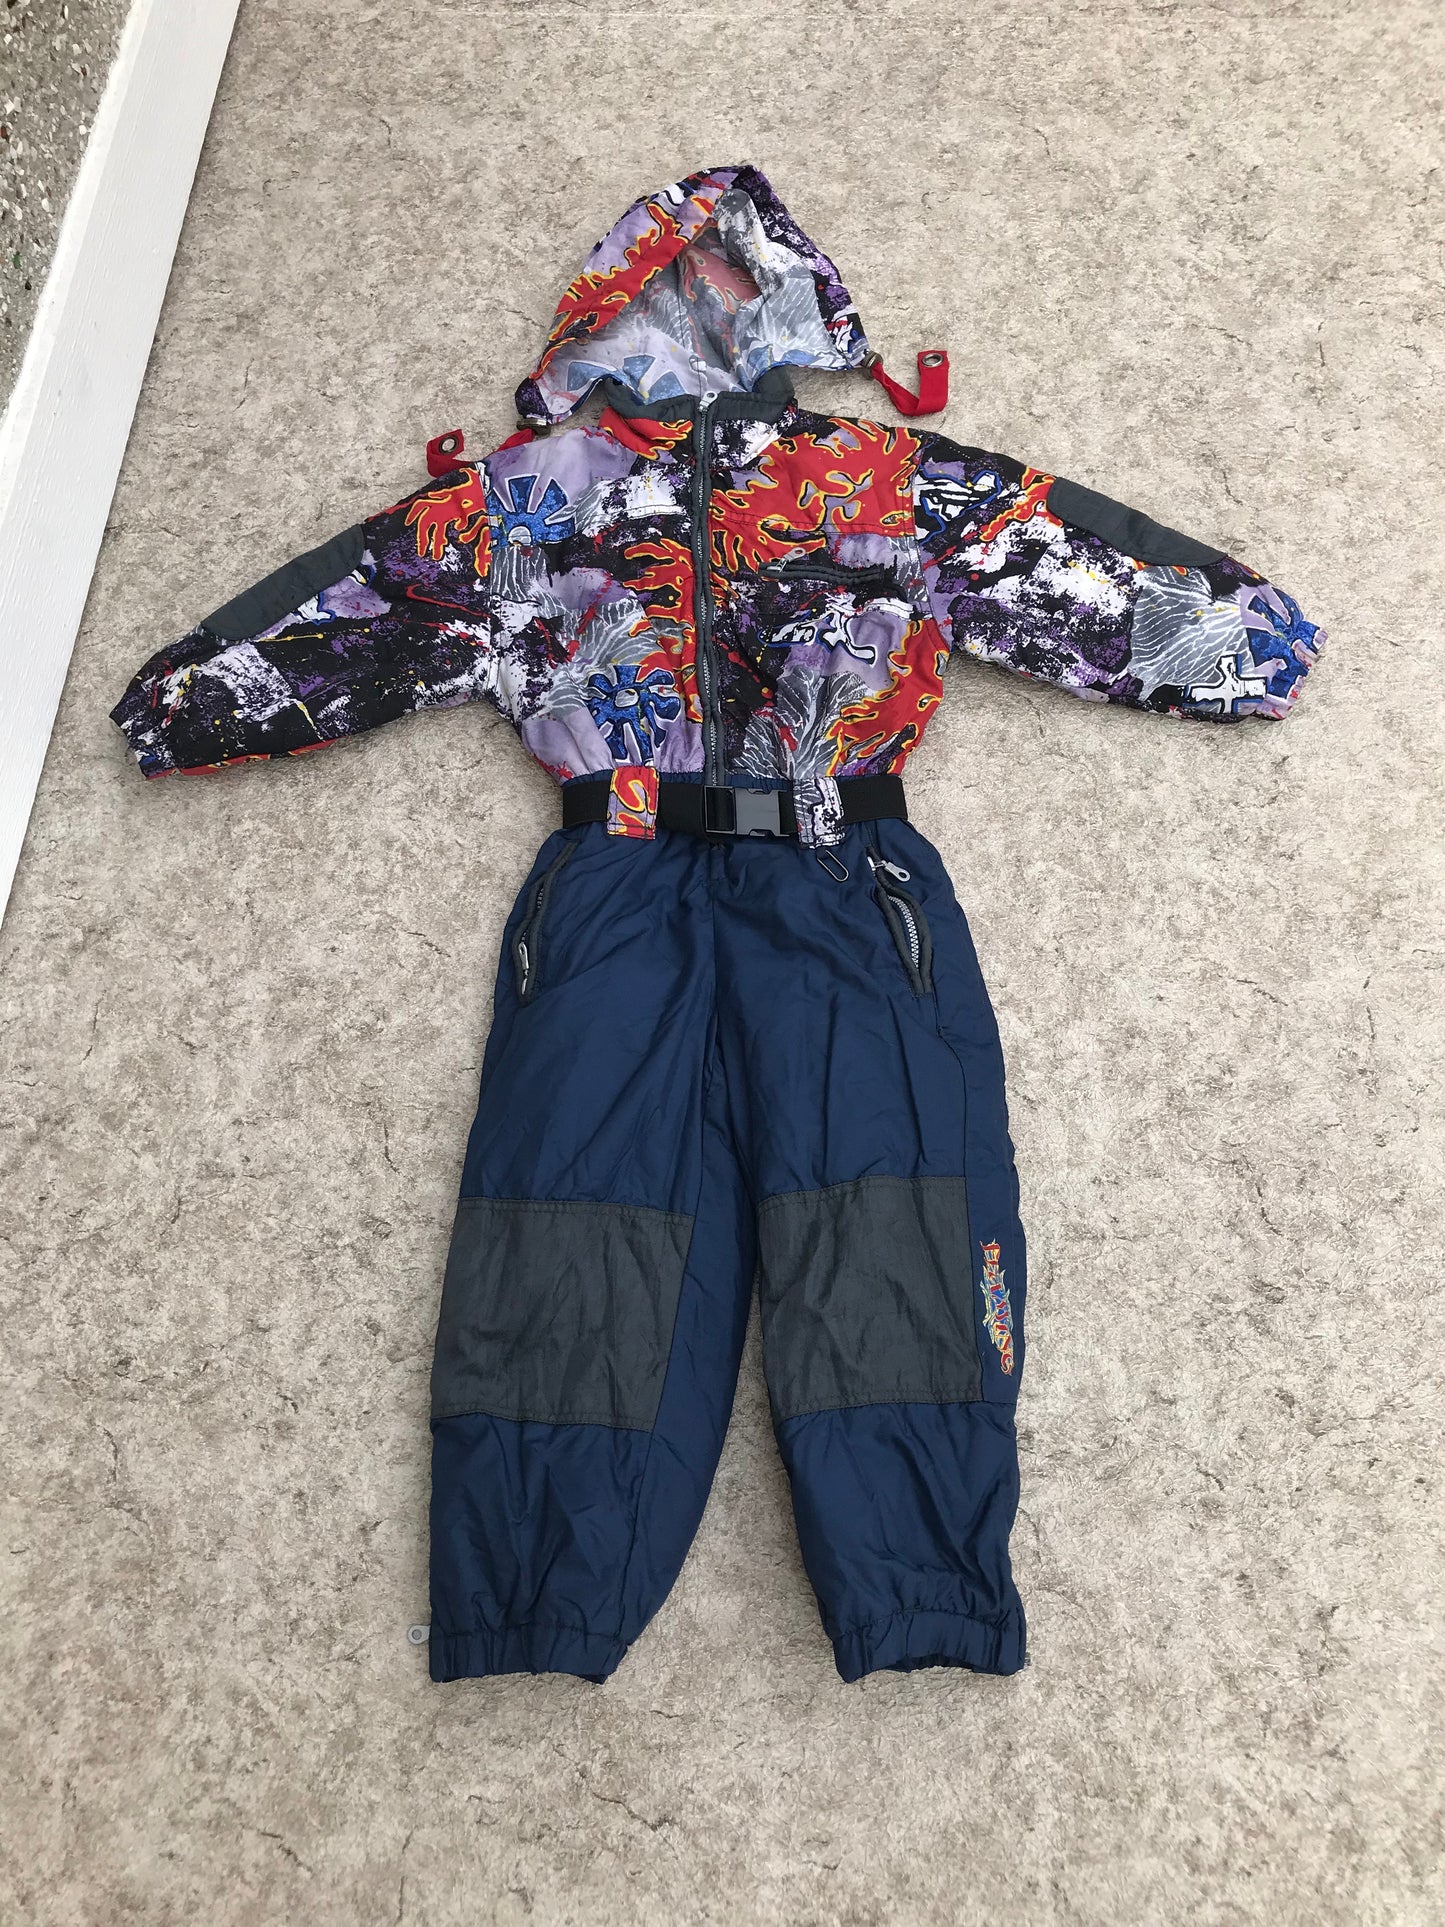 Snowsuit Child Size 4-6 Made in Europe Navy Multi